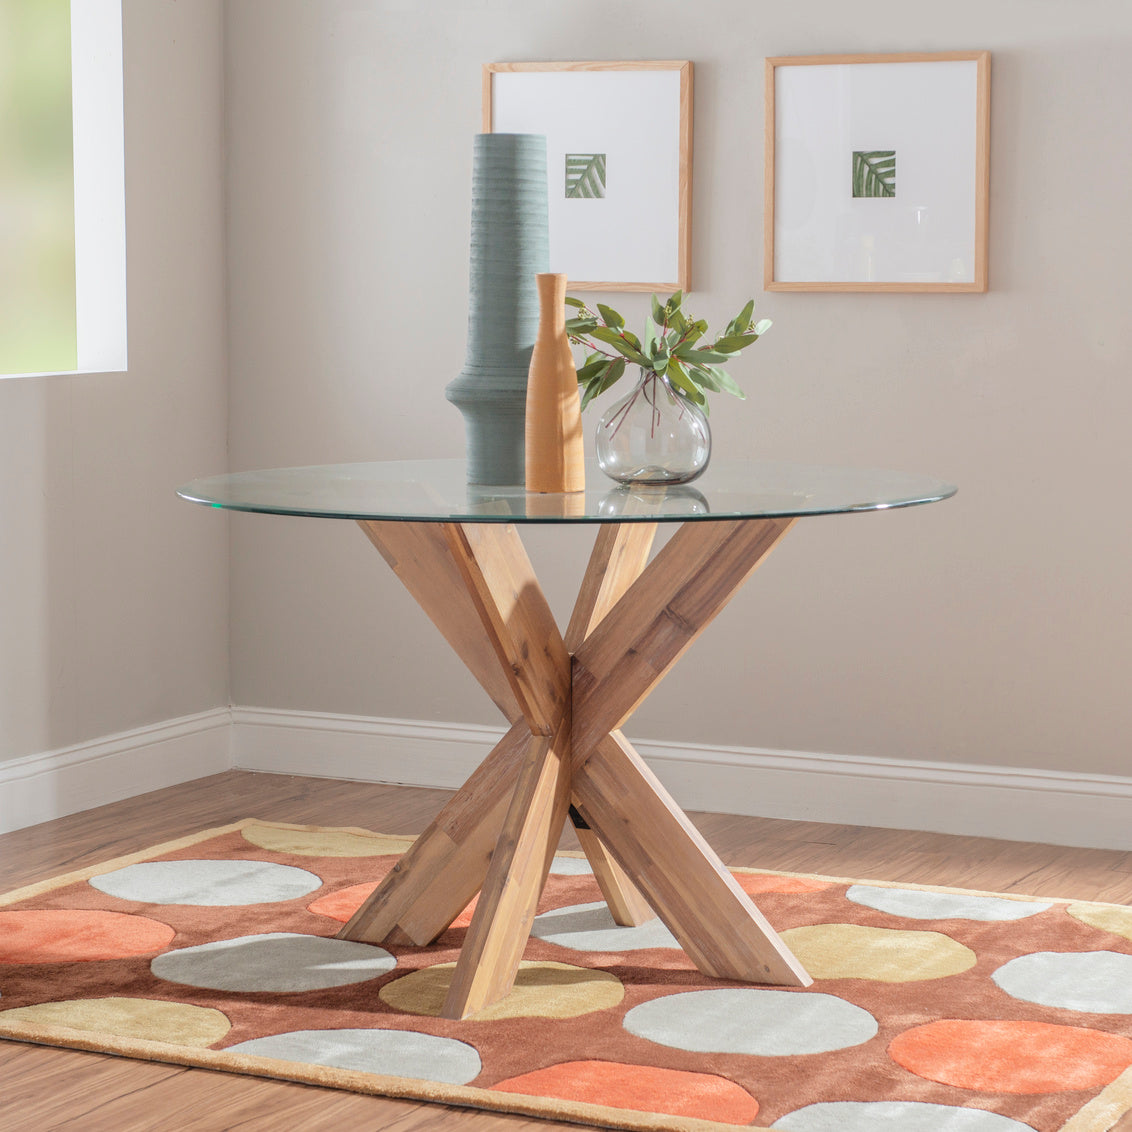 Auden Dining Table